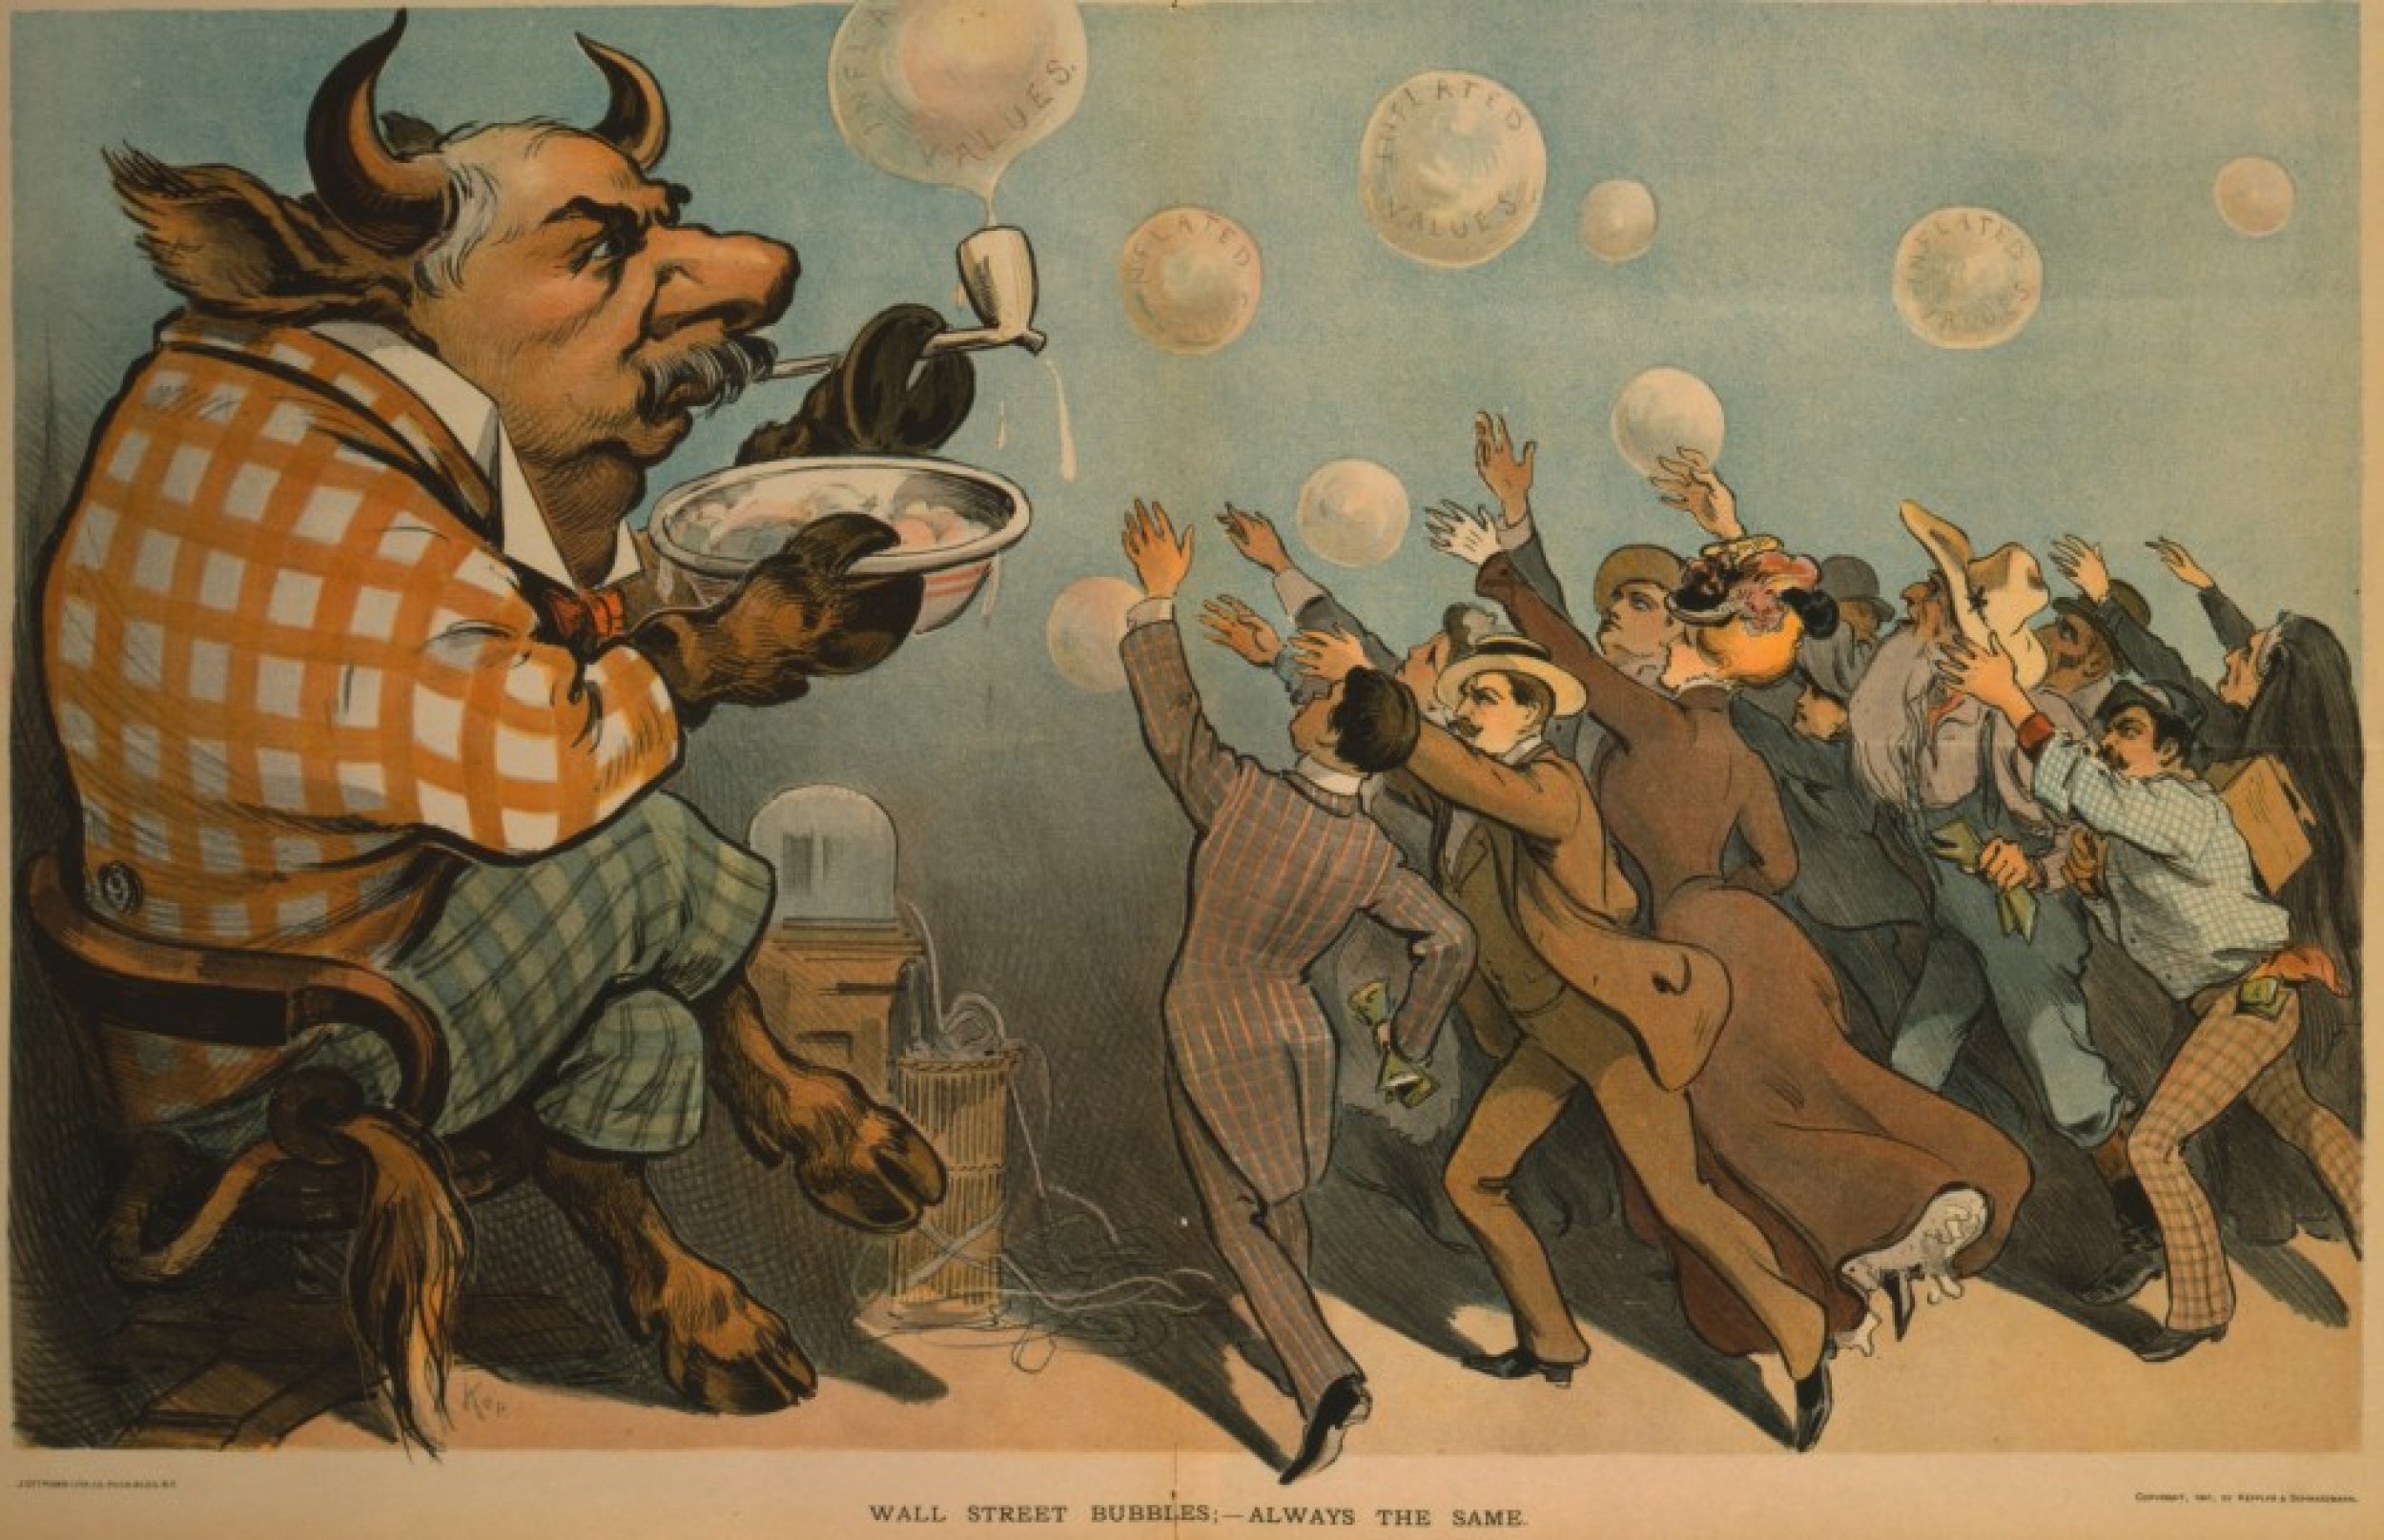 The way speculative bubbles seemed to have a life of their own was grasped by editorialists after 1901, with Wall Street finance itself being seen as a source of evil market disruptions. A Puck magazine centerfold from 1902.